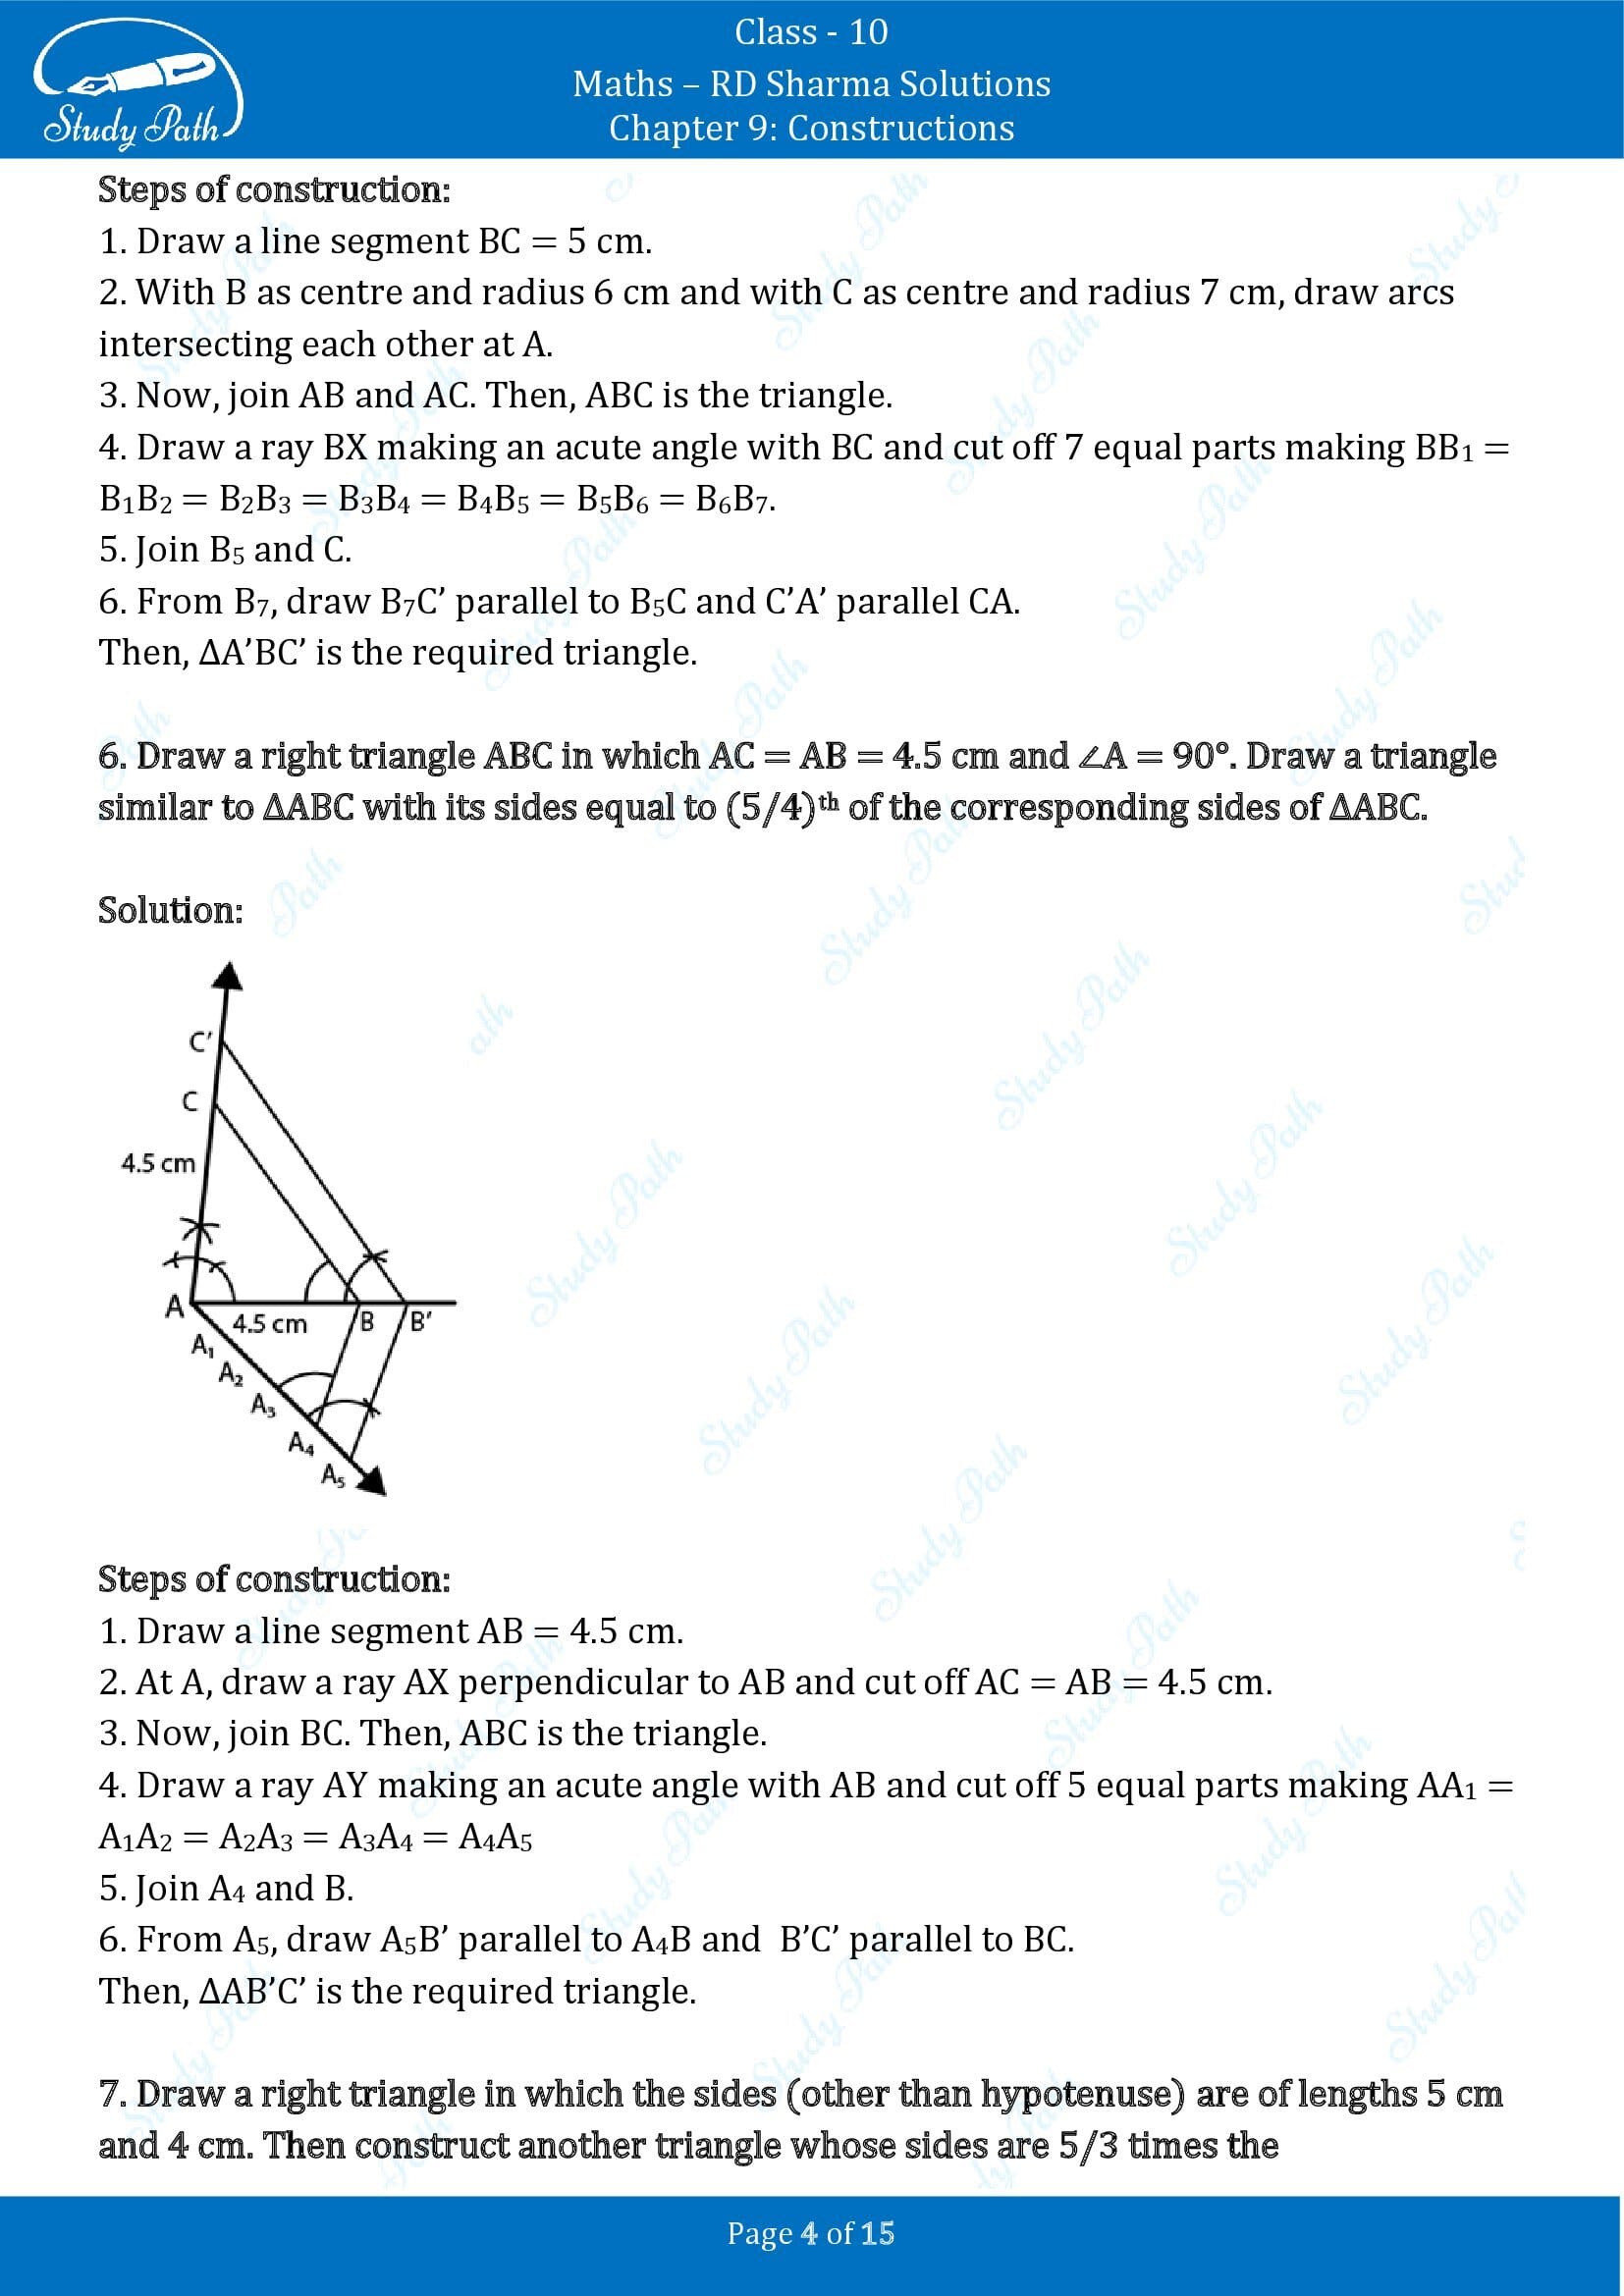 RD Sharma Solutions Class 10 Chapter 9 Constructions Exercise 9.2 00004